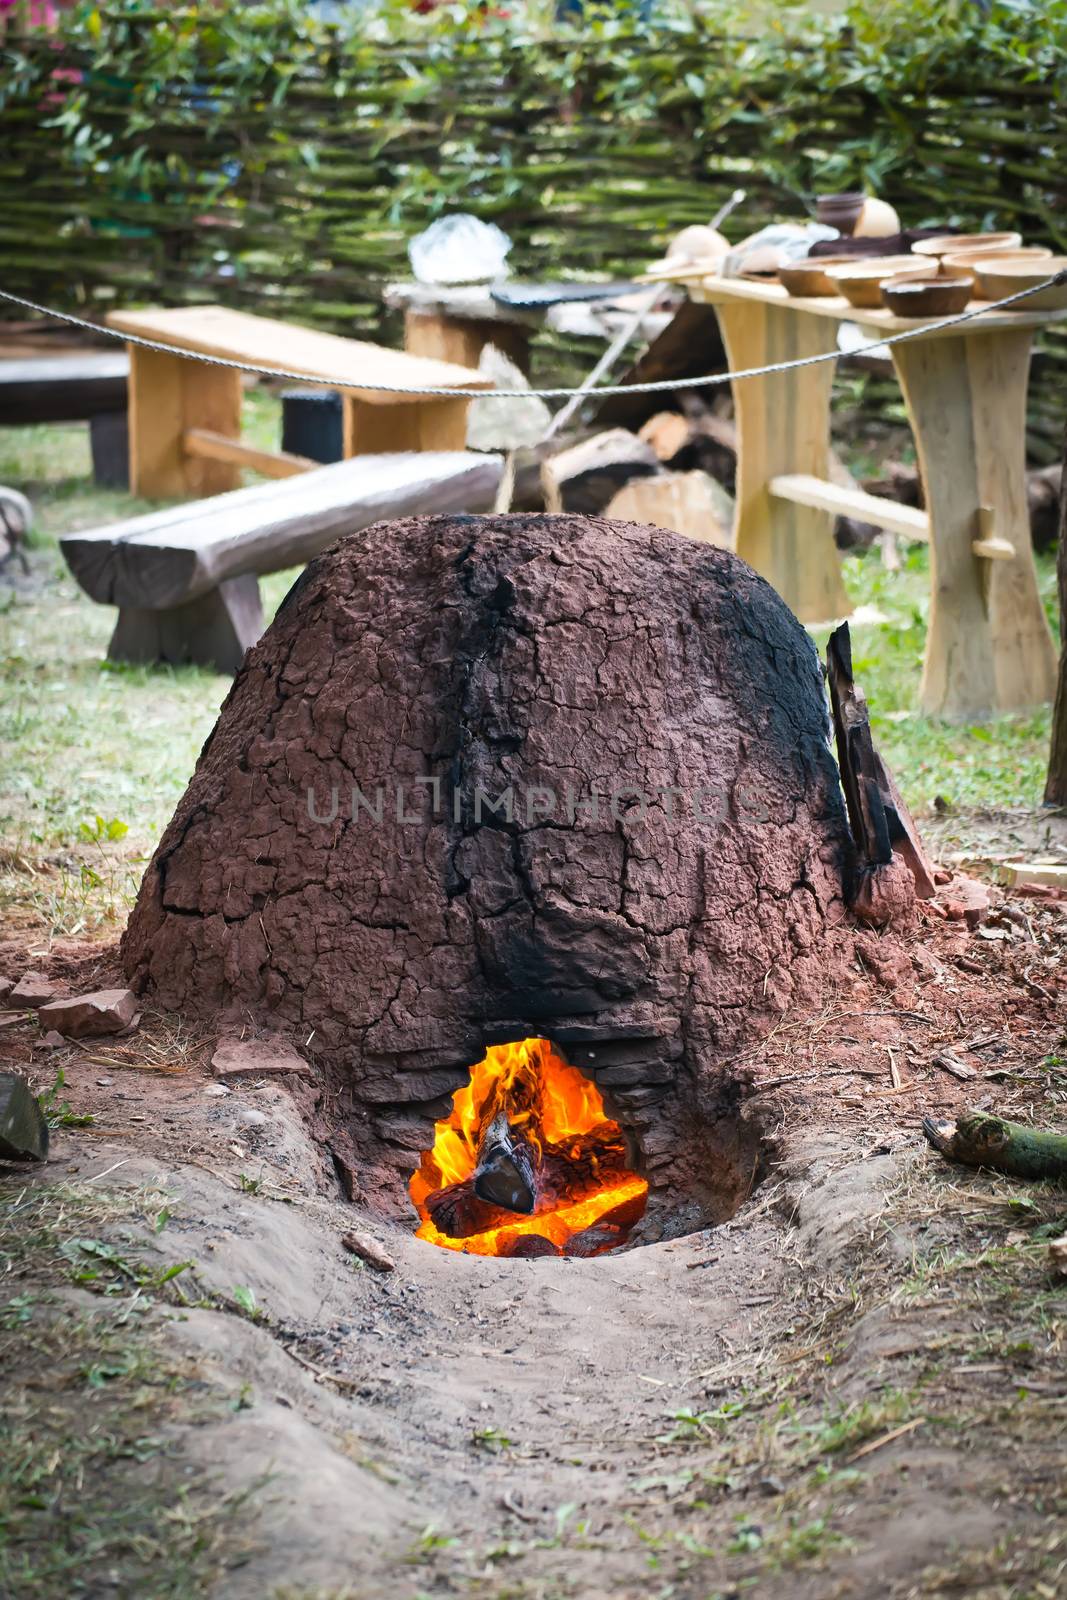 Old slavic furnace made of clay and stones